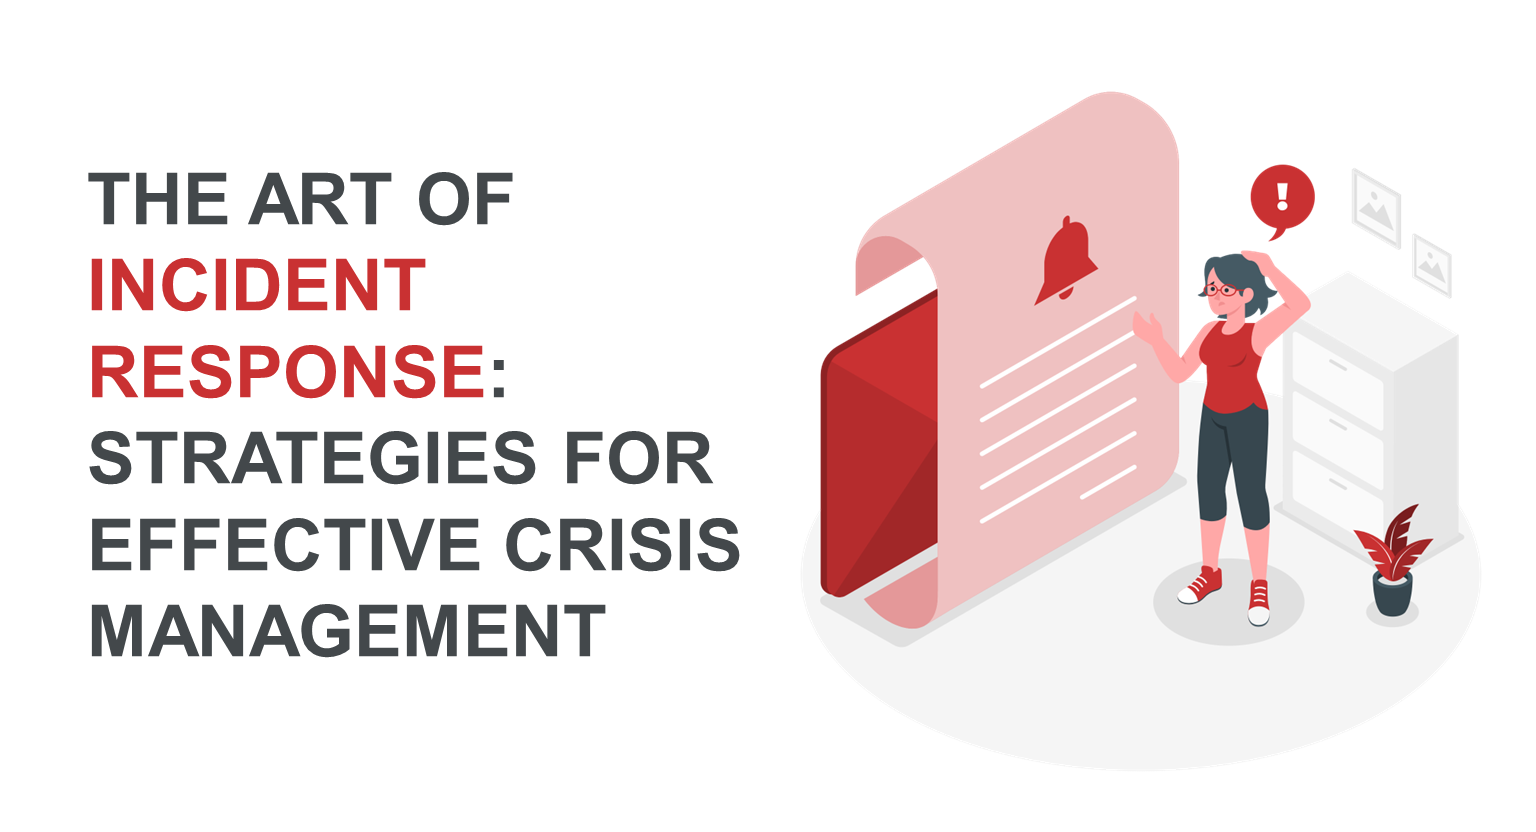 The Art of Incident Response: Strategies for Effective Crisis Management 